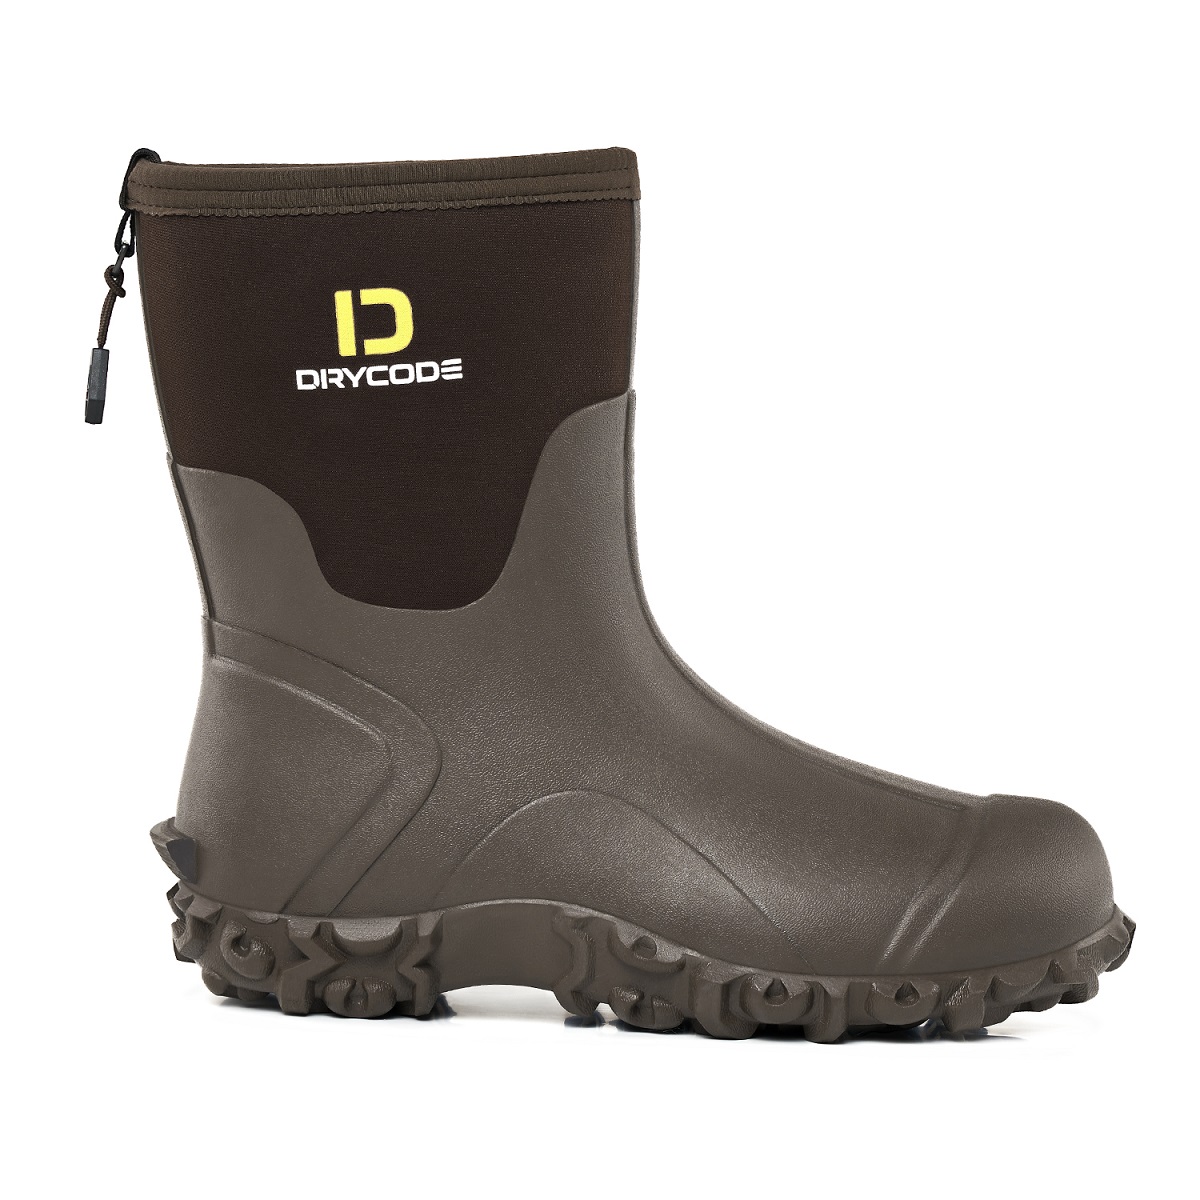 D DRYCODE Rain Boots Men, Waterproof Fishing Deck Boots, Anti-Slip Ankle  Rubber Boots, Outdoor Rain Shoes for Mens Boating, Womens